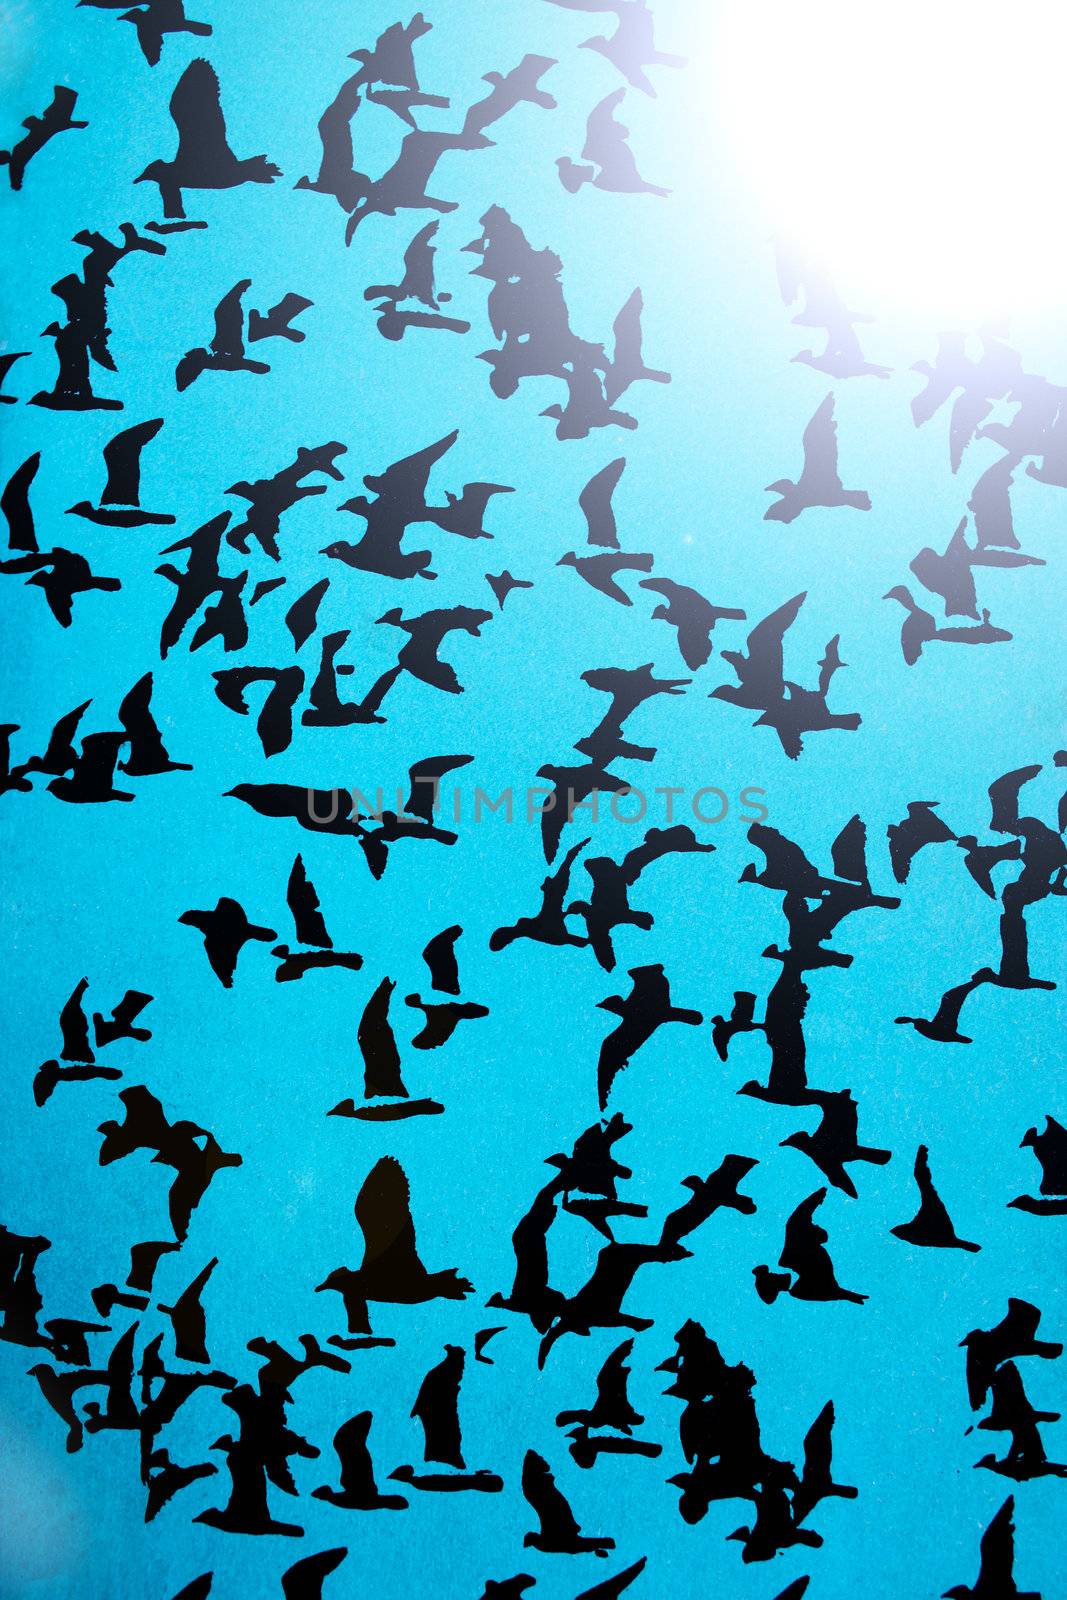 Set of black silhouettes of birds on a blue background